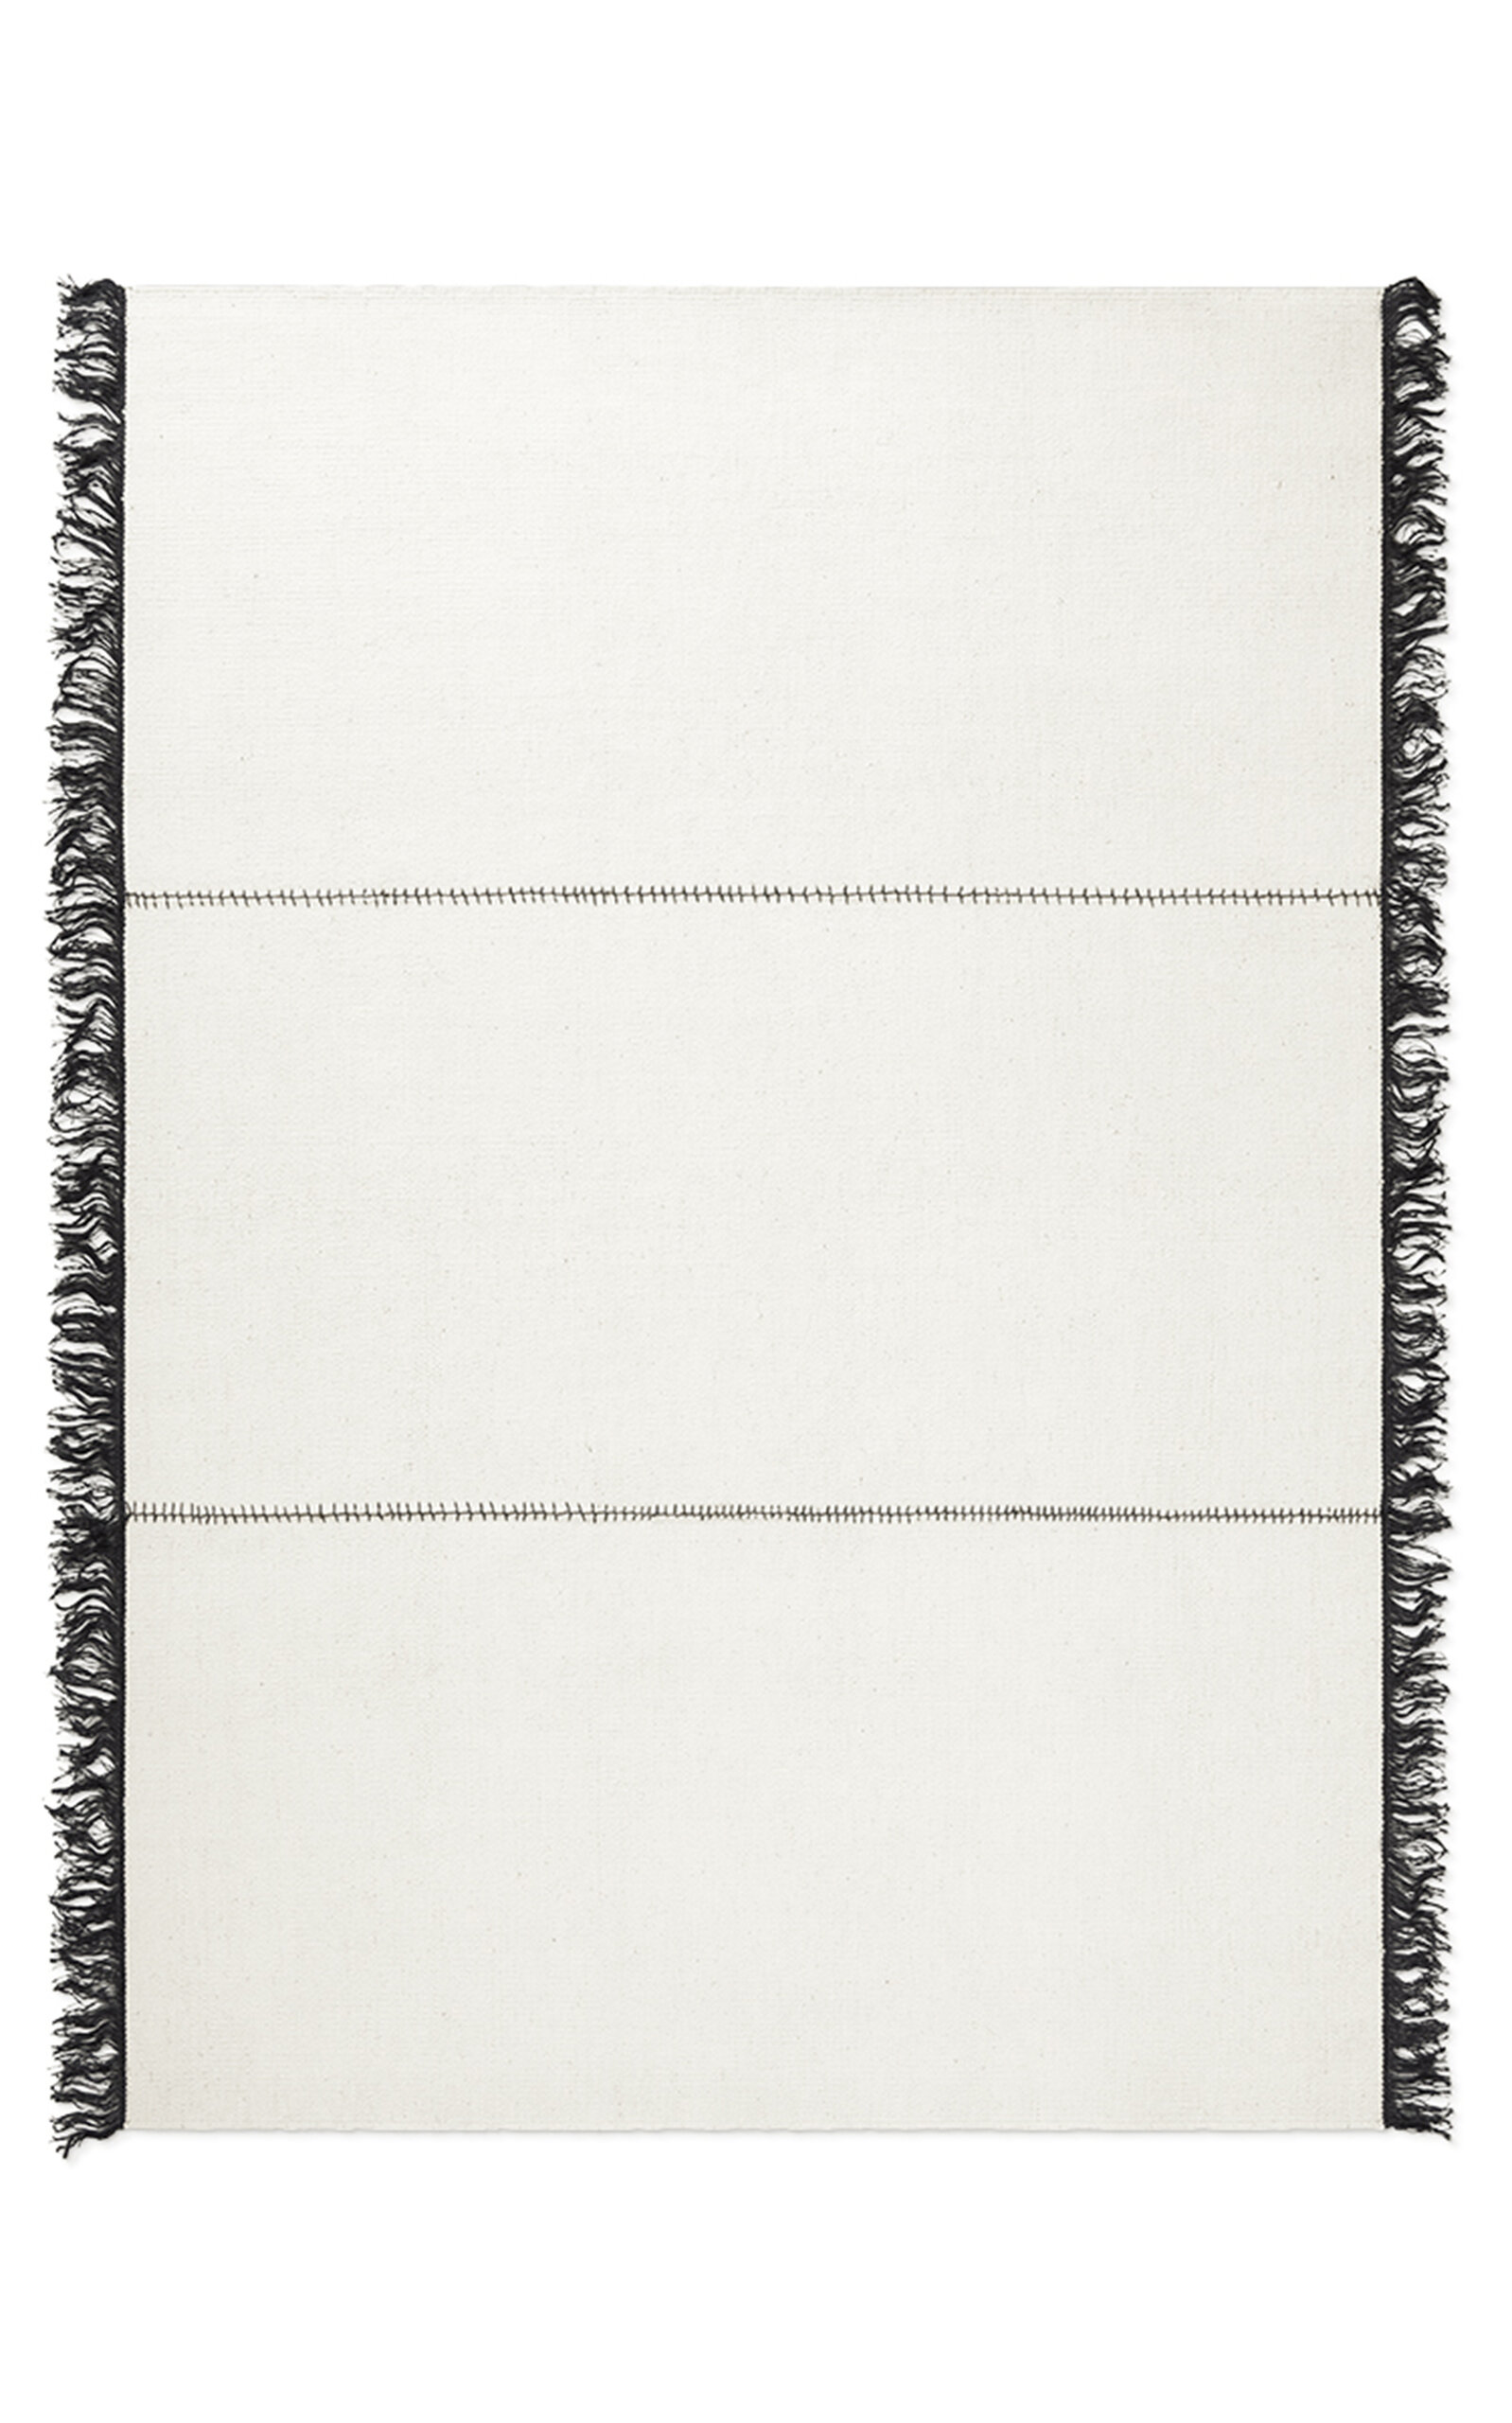 Nordic Knots Stitches By ; Flatweave Area Rug In Old White; Size 5' X 8' In Off-white